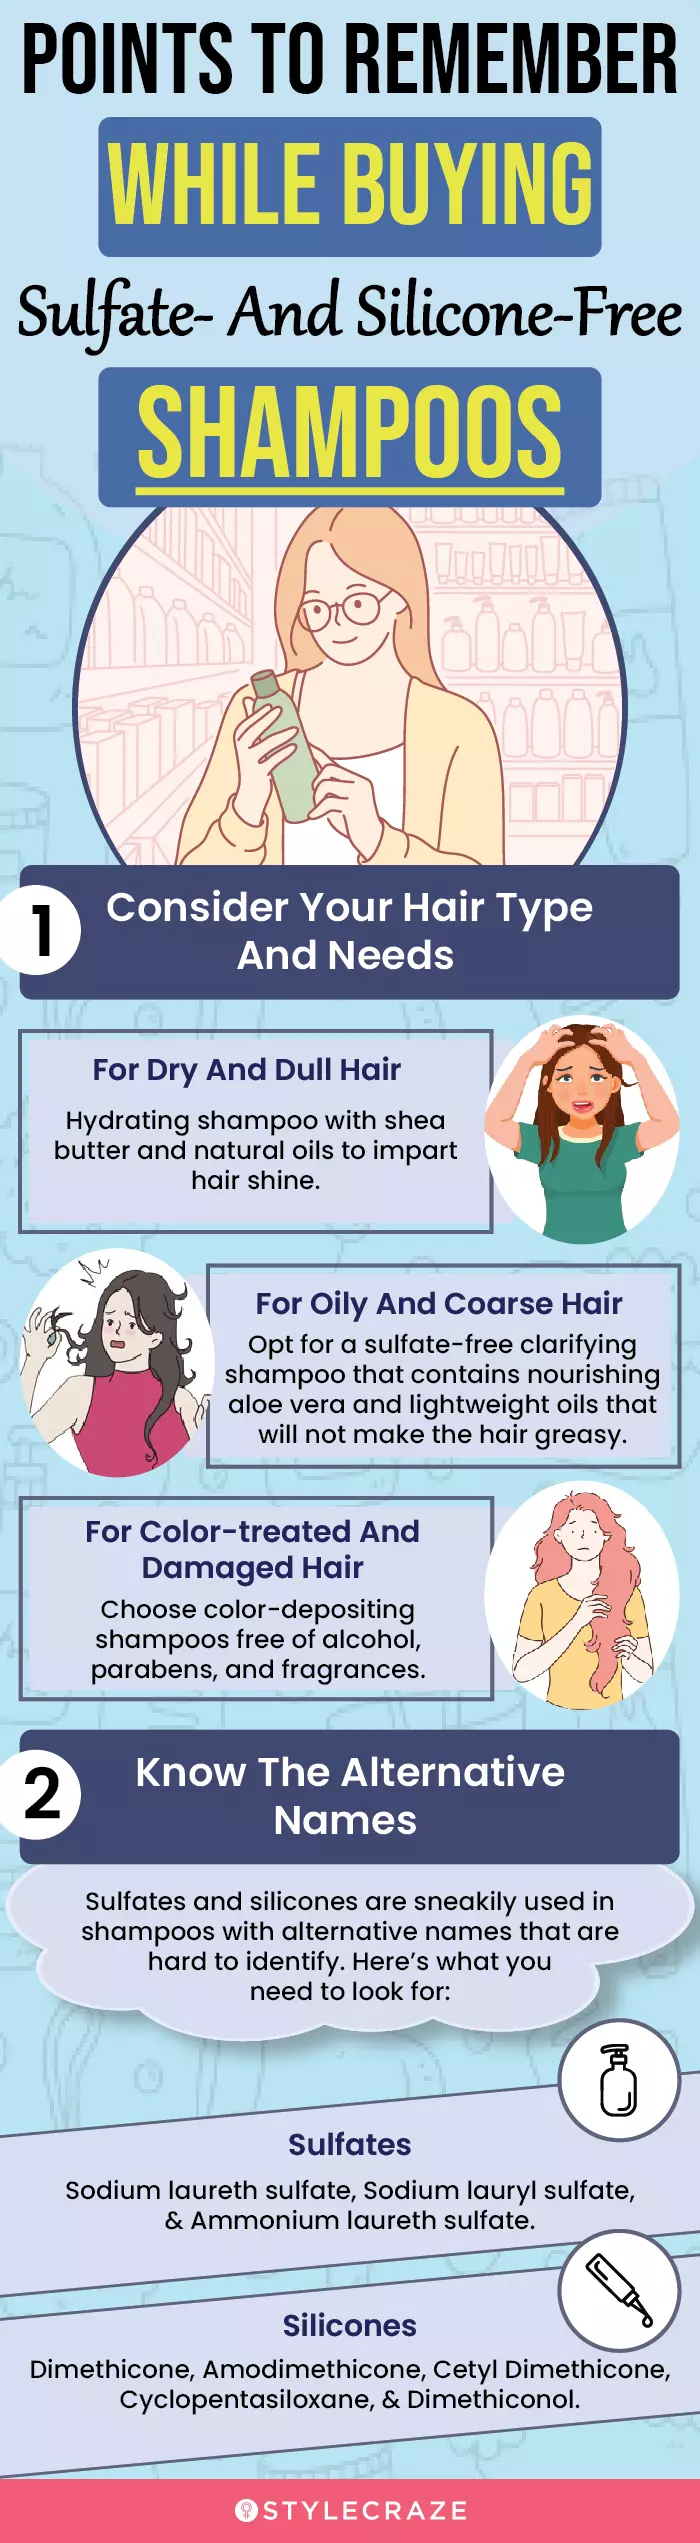 Points To Remember While Buying Sulfate- And Silicone-Free Shampoos (infographic)